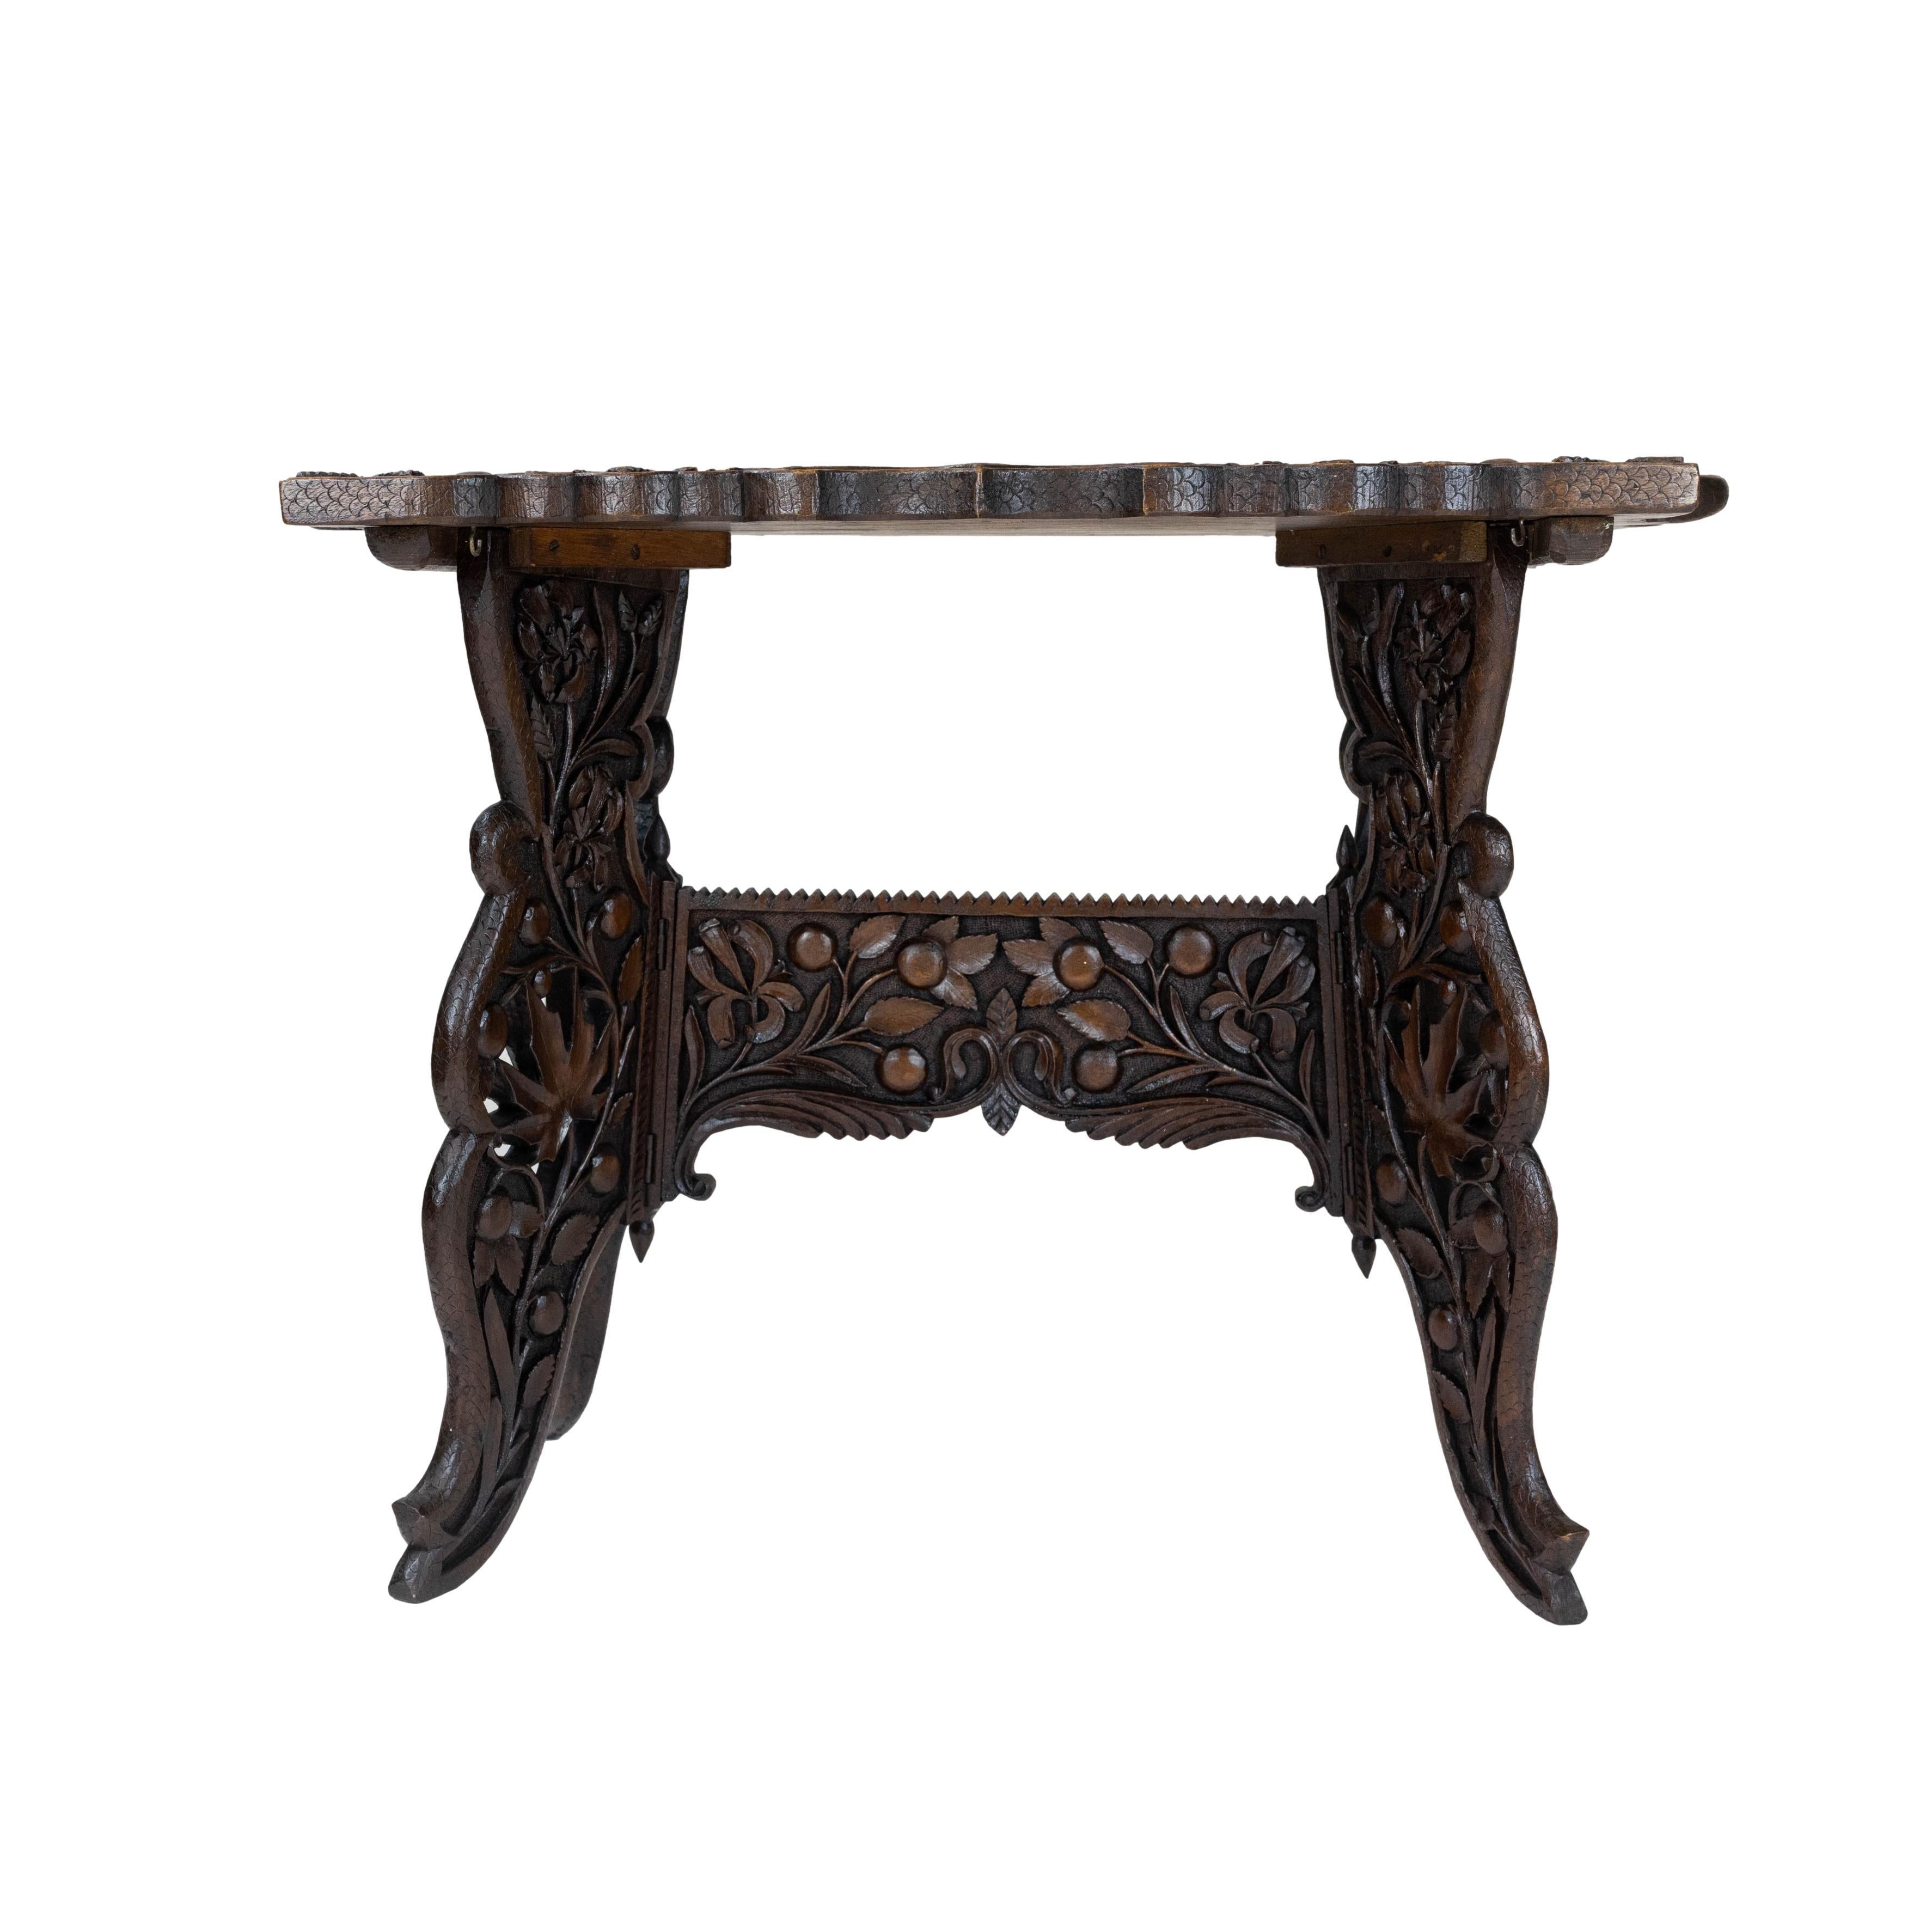 Elaborately Hand-Carved Solid Walnut Campaign Tray-Top Table, English, ca. 1890 For Sale 2